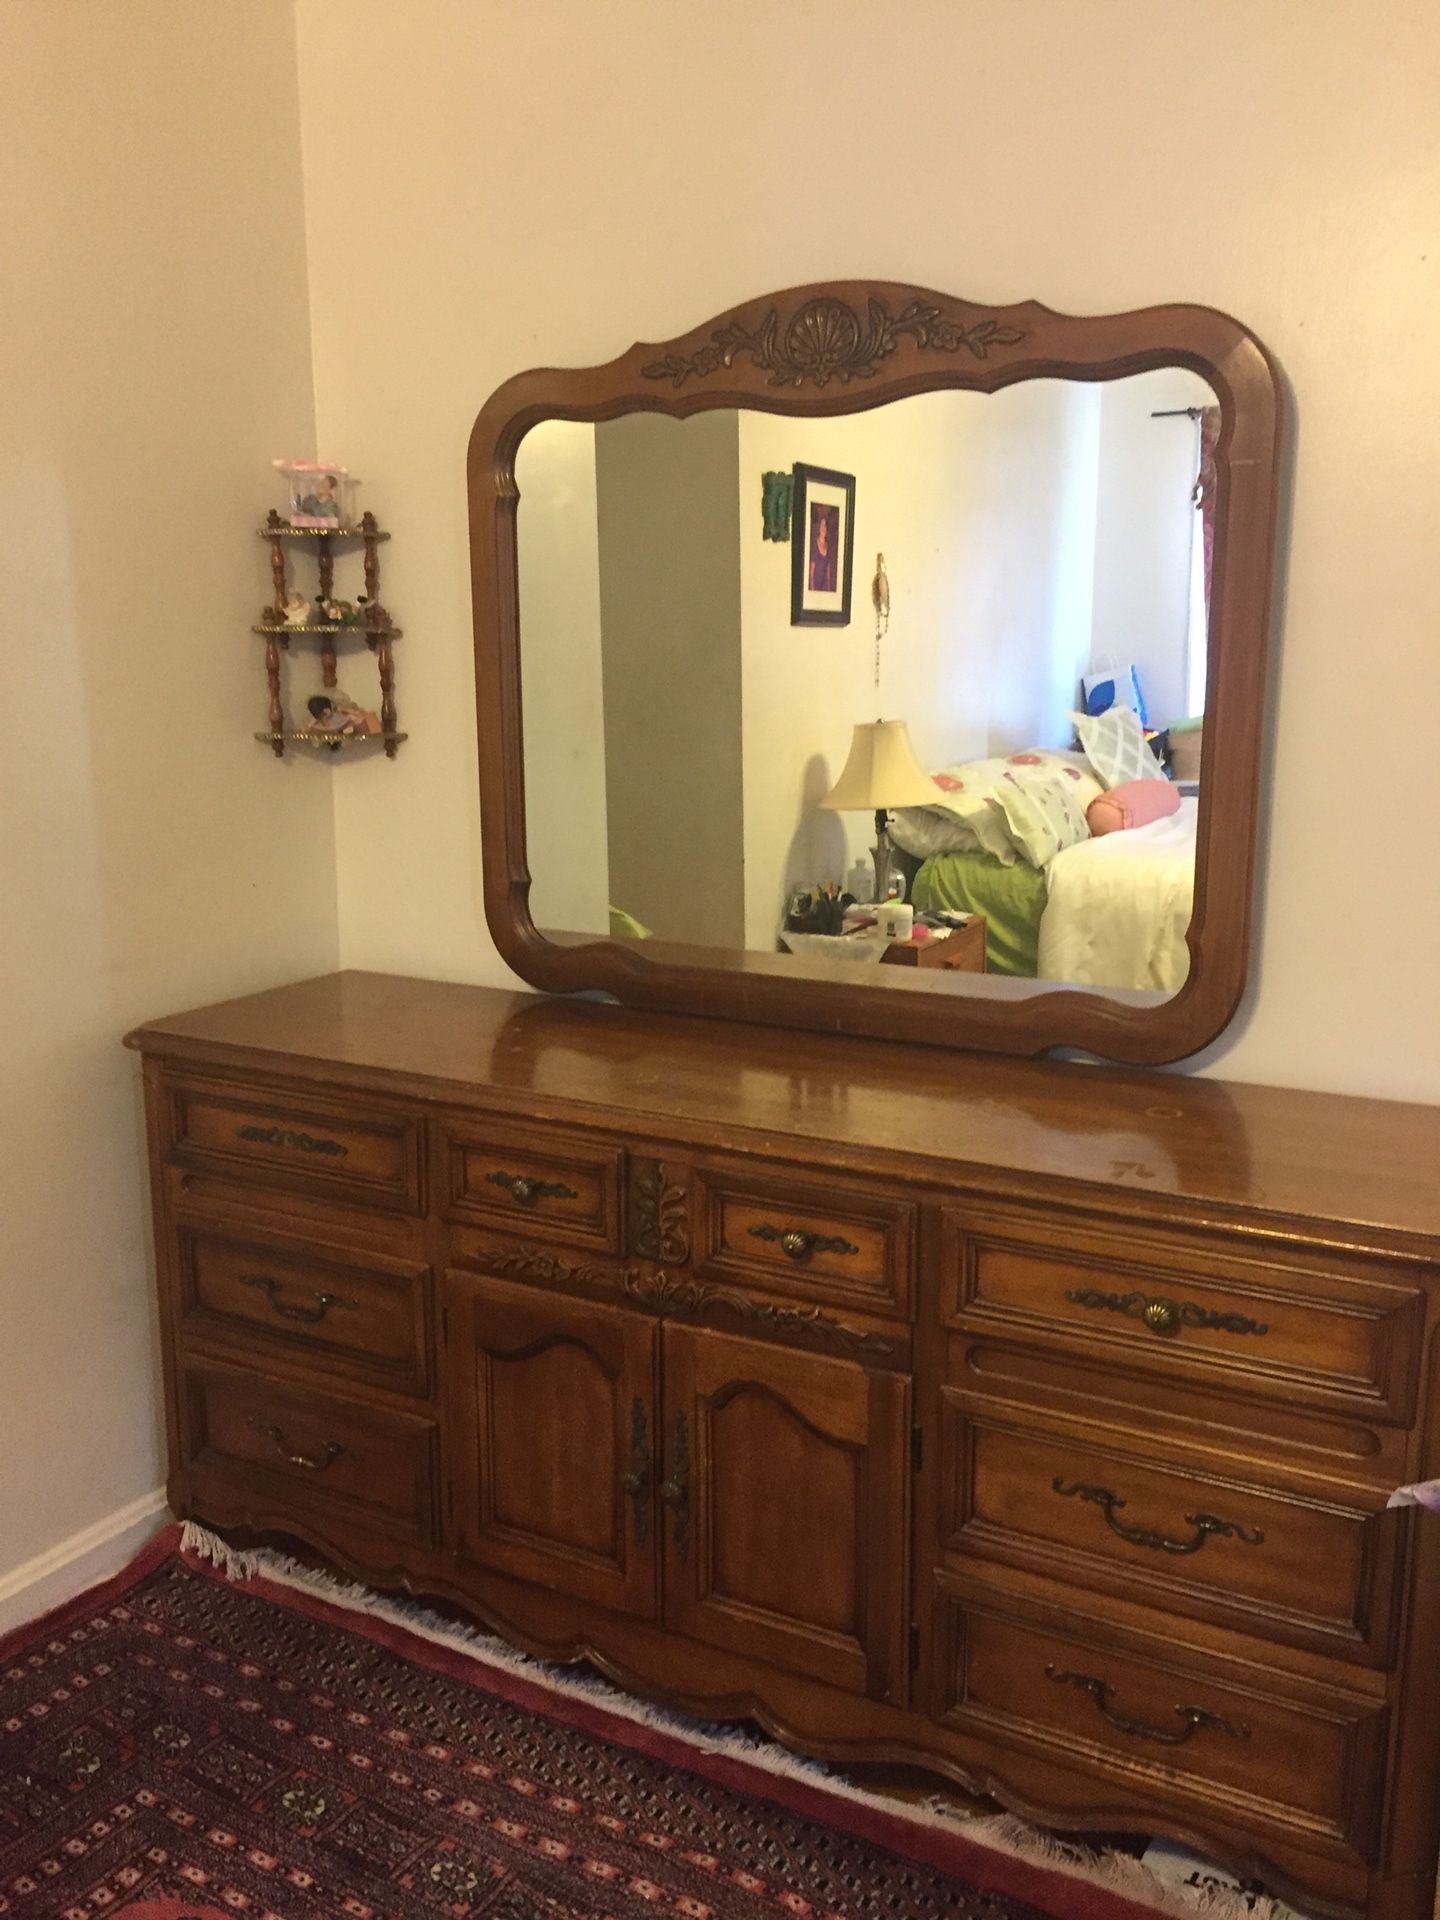 Sale moving Beautiful dresser with mirror 71x34 and 19. Bring 2 people and transportation Make an offer